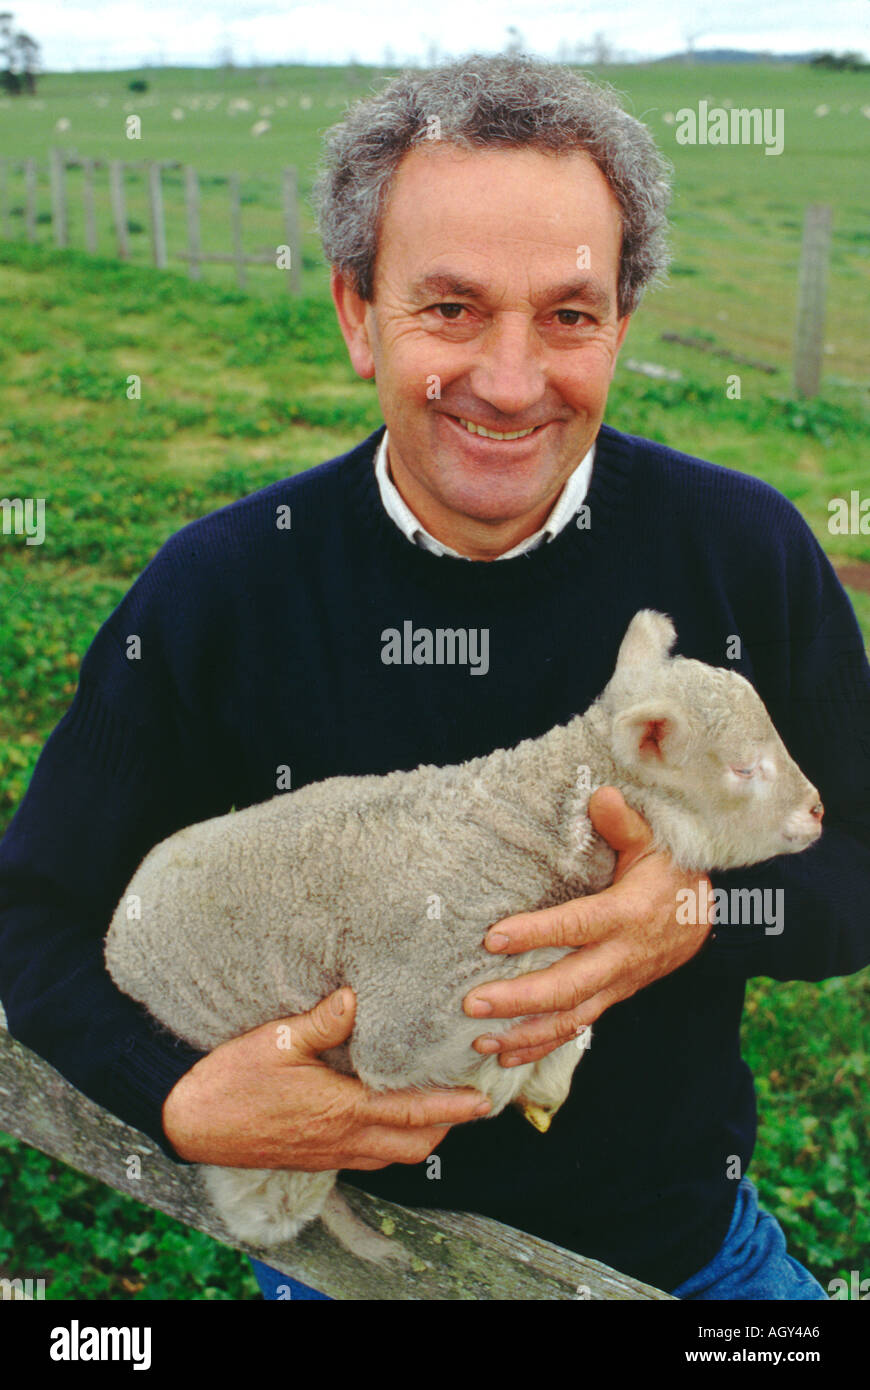 A Tasmanian grower of world class superfine merino wool with a young lamb from his flock Stock Photo